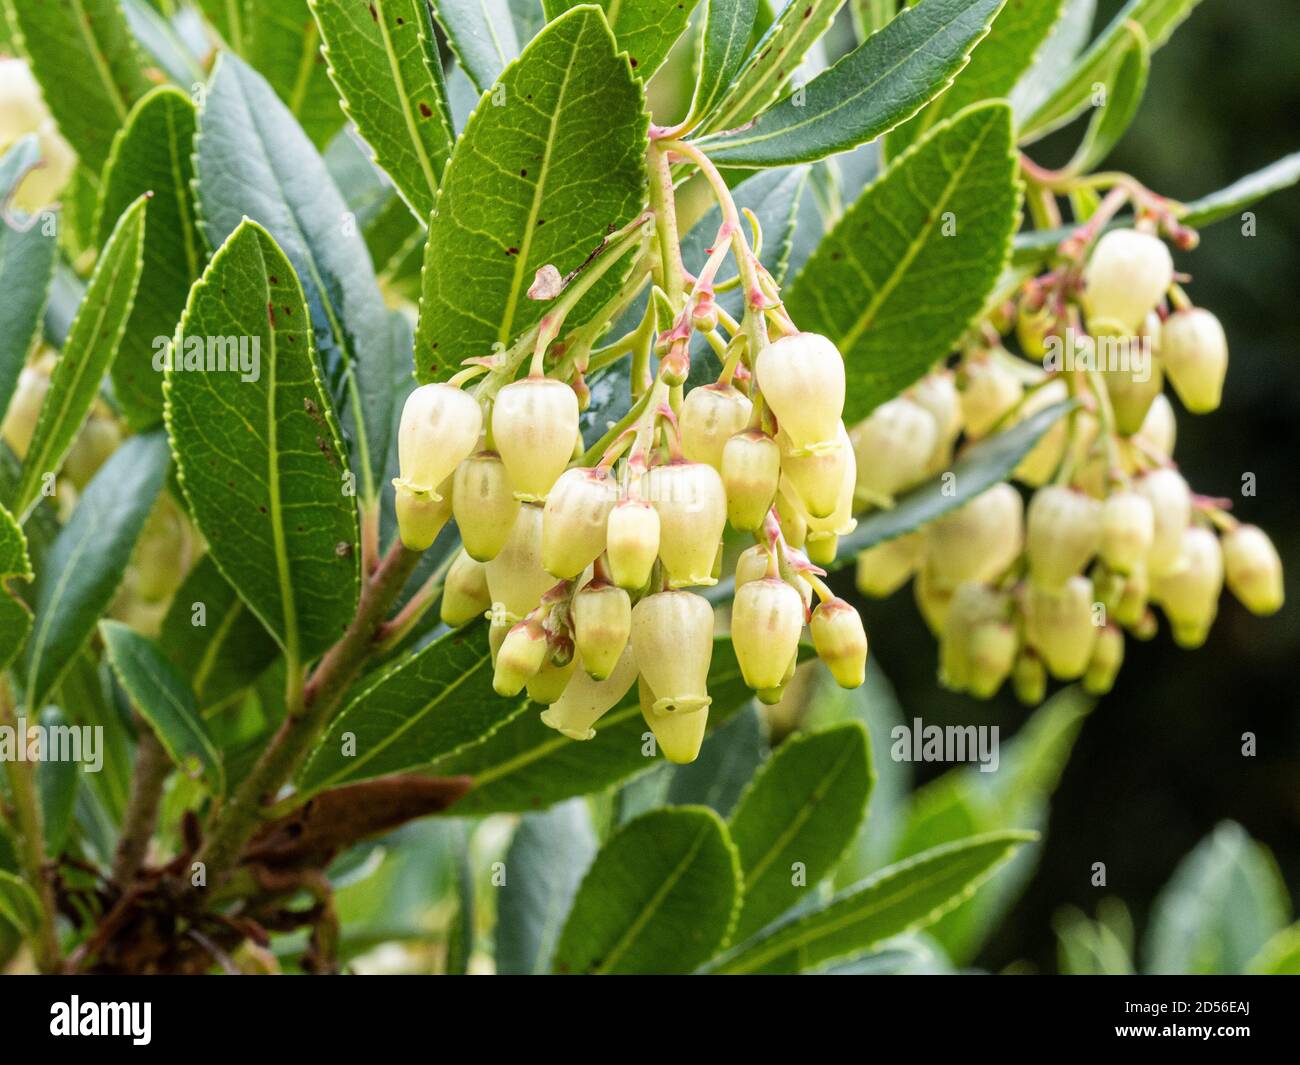 A close up of the pale cream bell shaped flowers of the strawberry tree Arbutus unedo Stock Photo